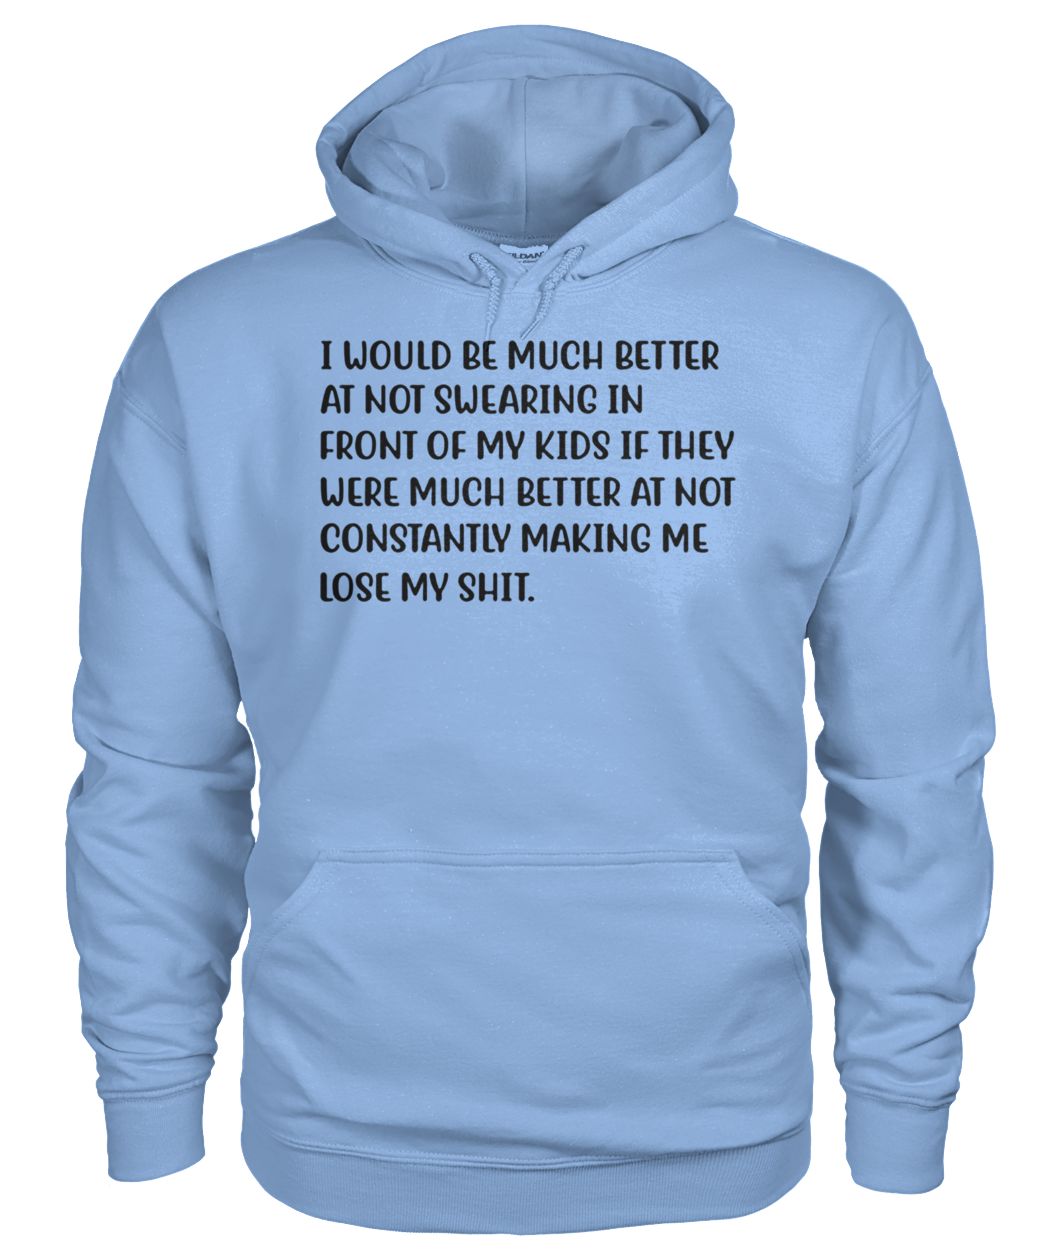 I would be much better at not swearing in front of my kids gildan hoodie